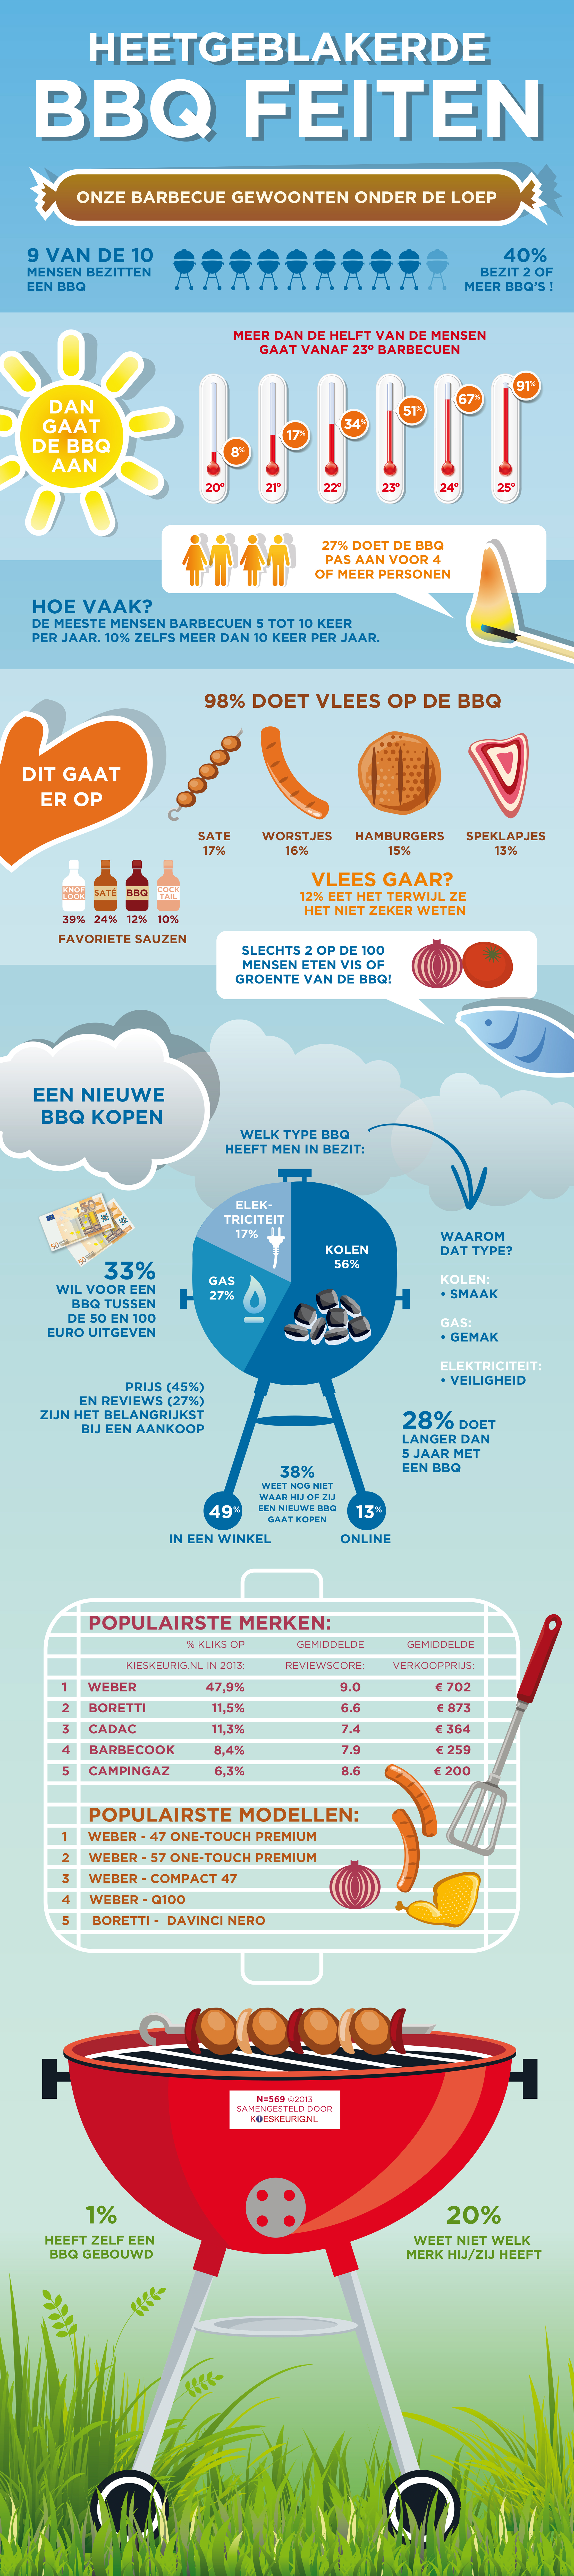 infographic: barbecues